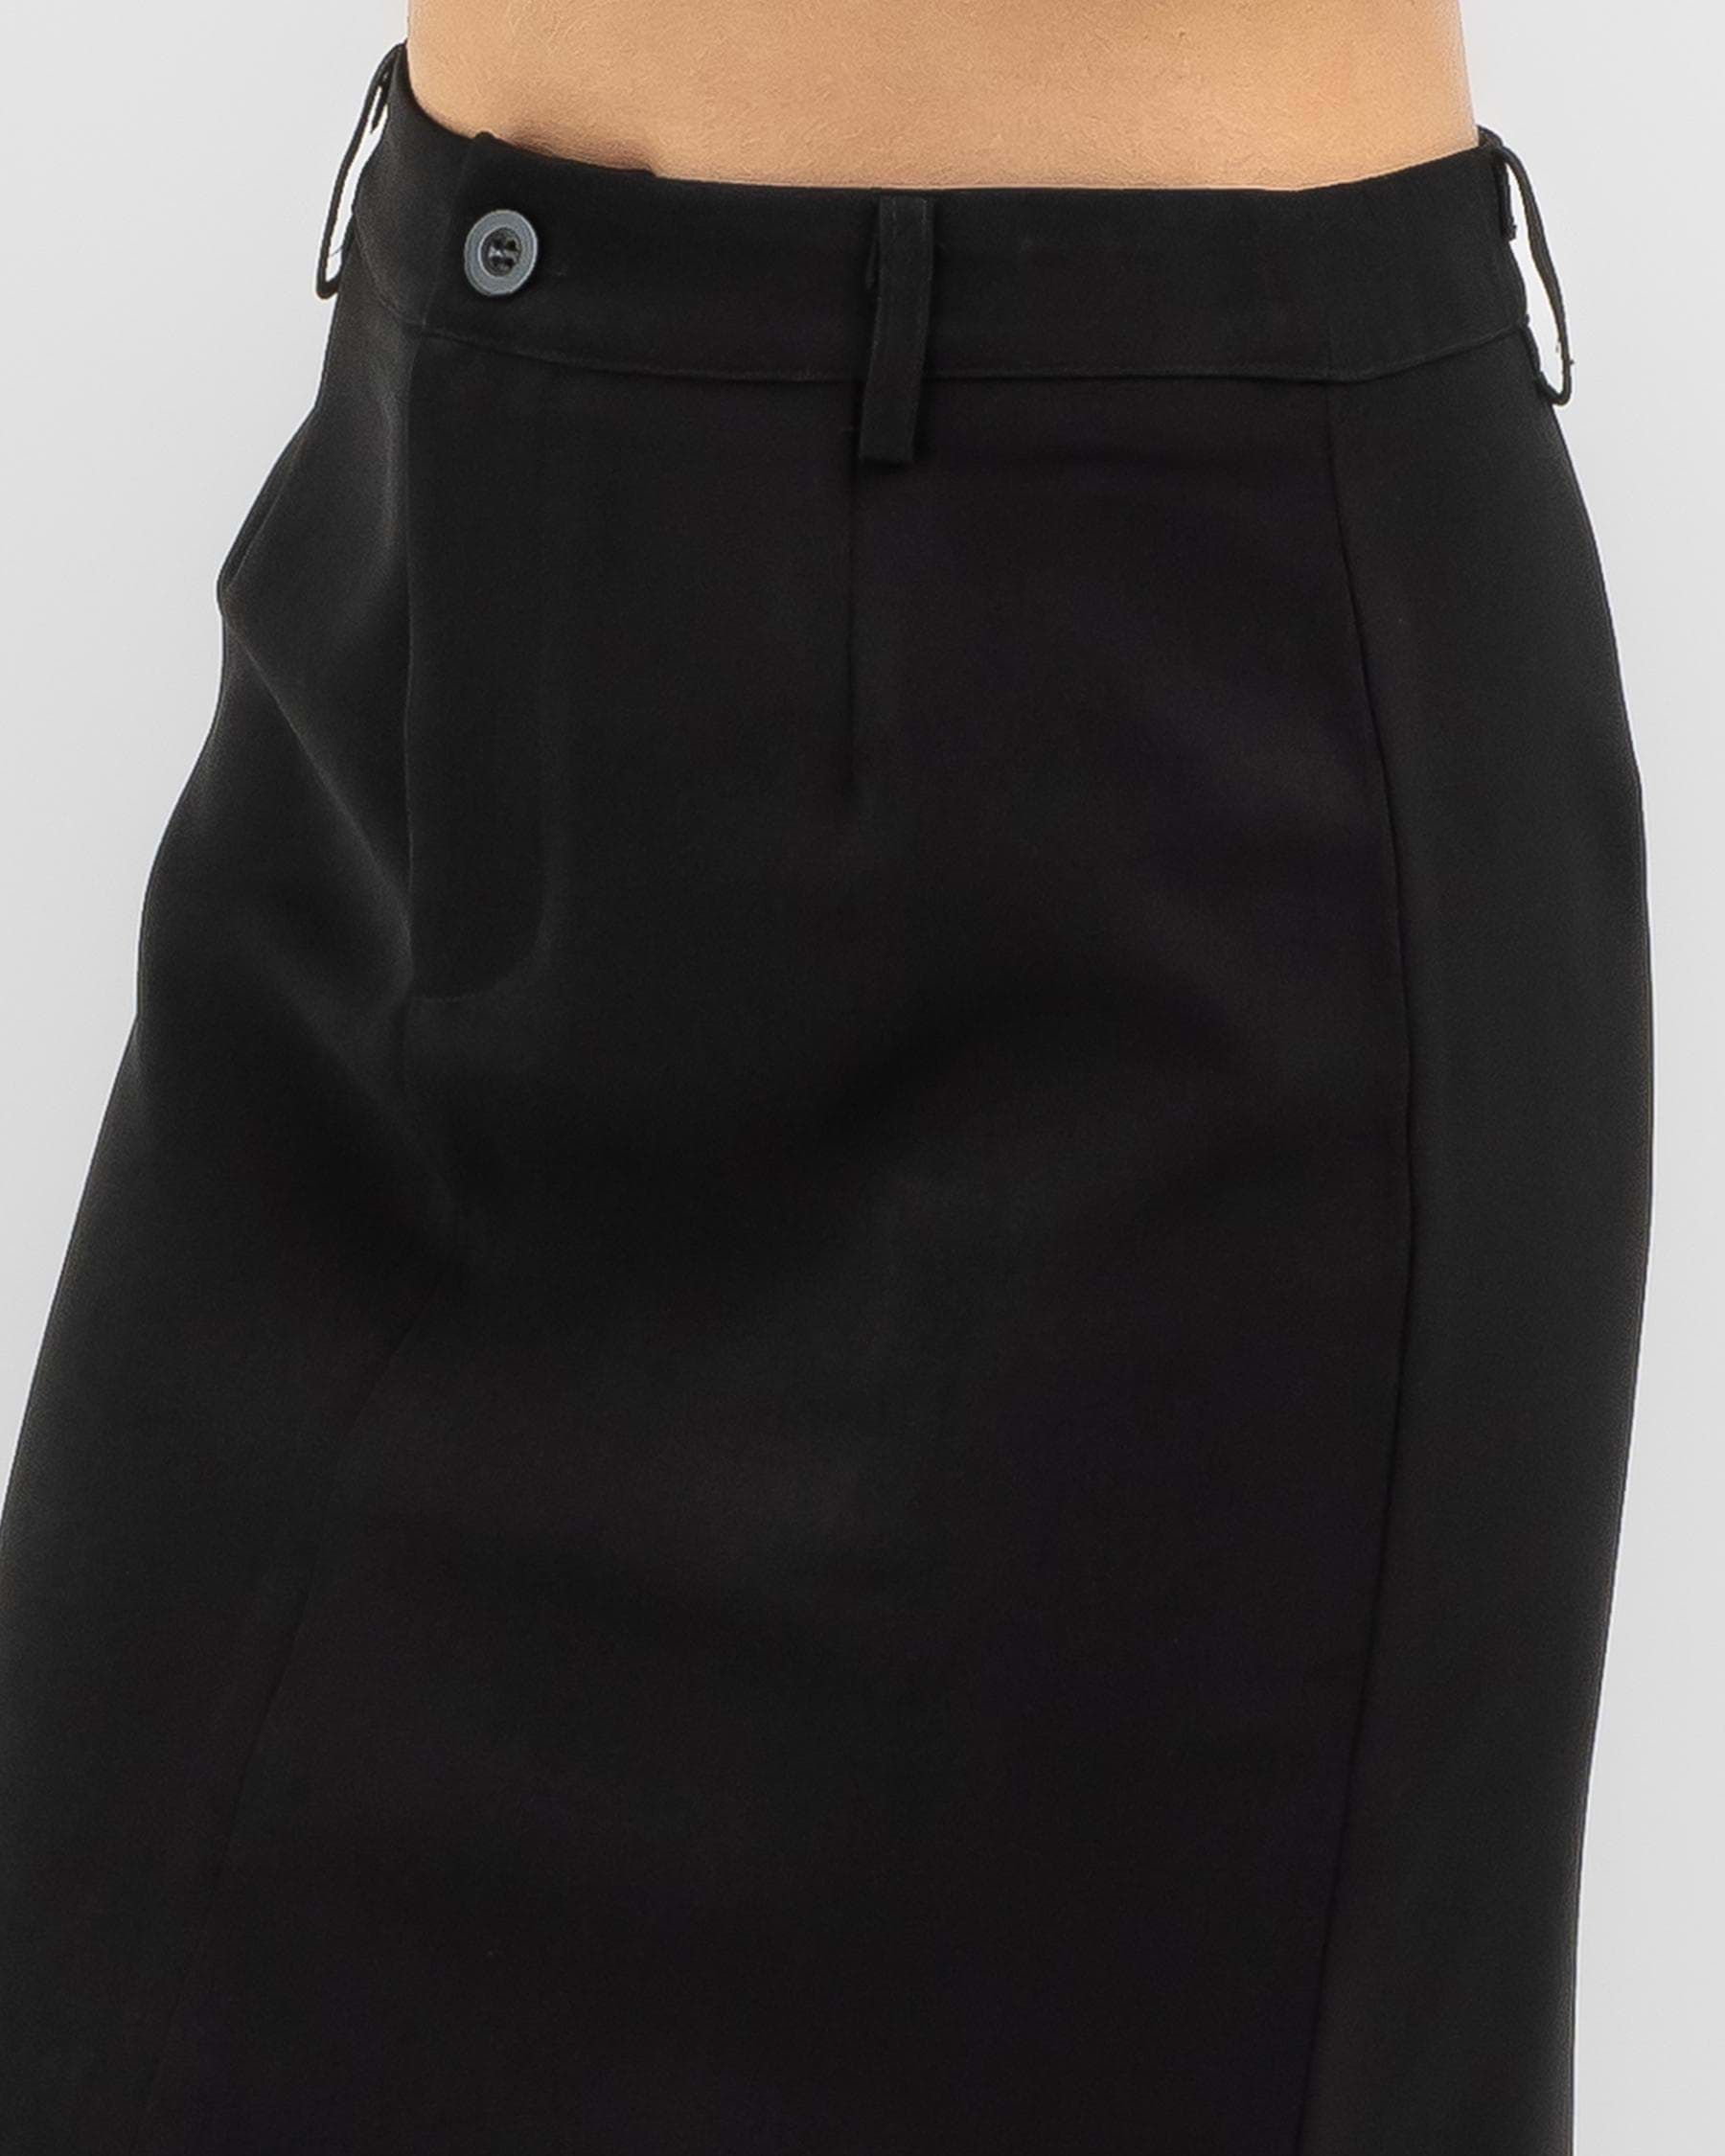 Shop Ava And Ever Mia Midi Skirt In Black - Fast Shipping & Easy ...